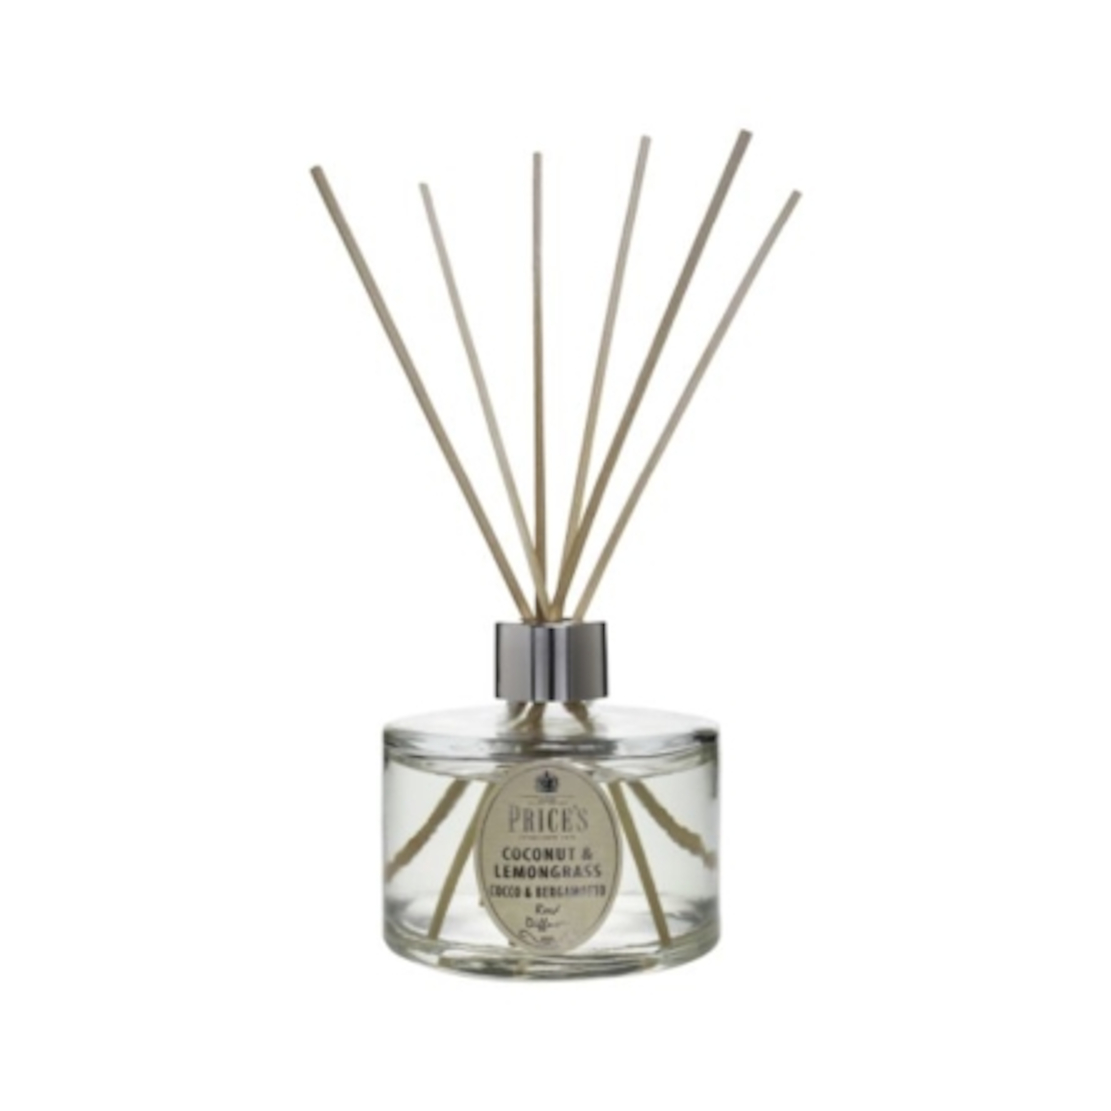 Prices Candles Coconut & Lemongrass 250ml Reed Diffuser